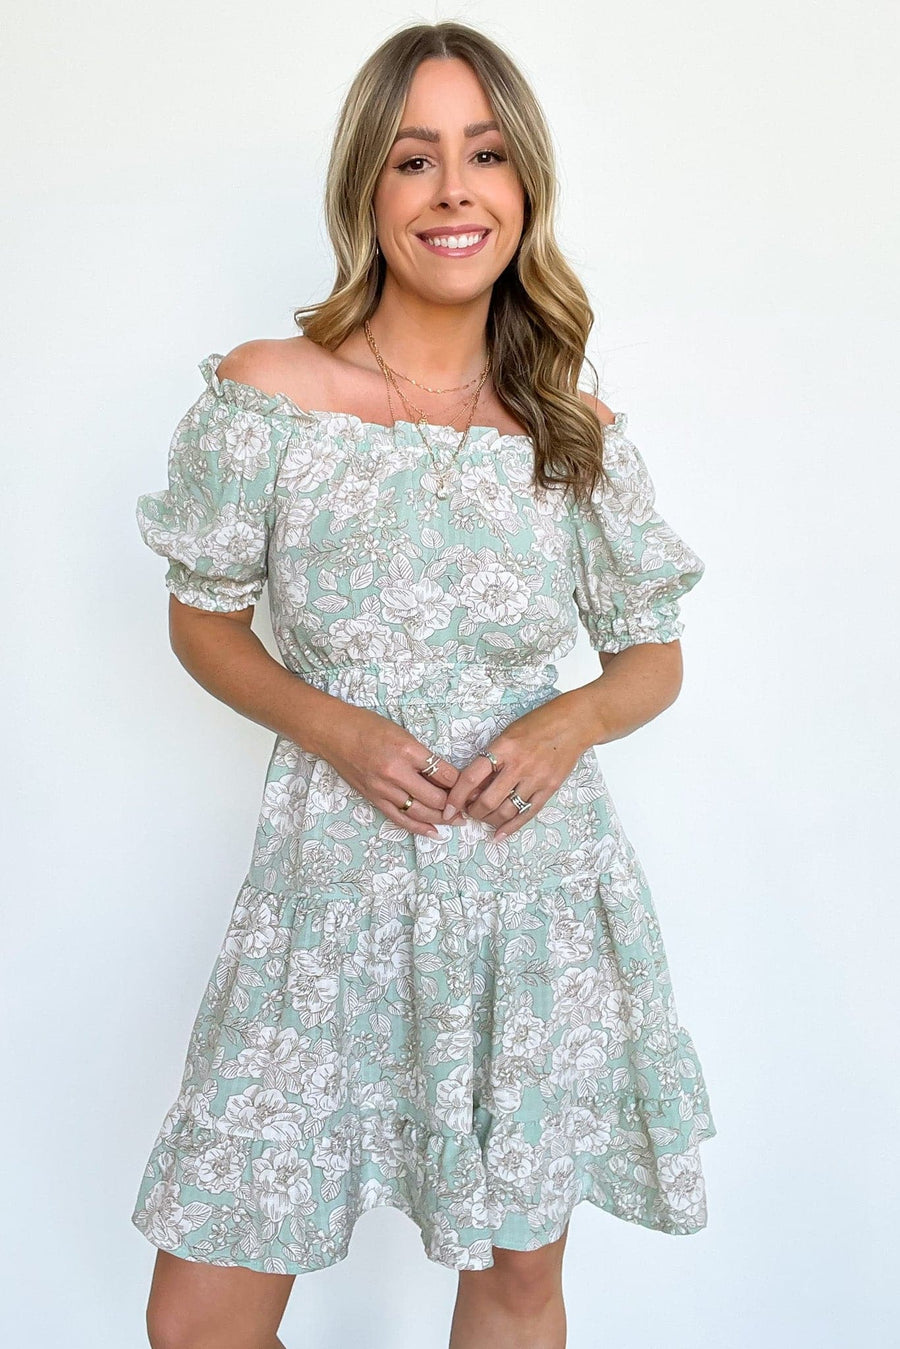  Dreamiest Darling Off Shoulder Ruffle Floral Dress - FINAL SALE - Madison and Mallory